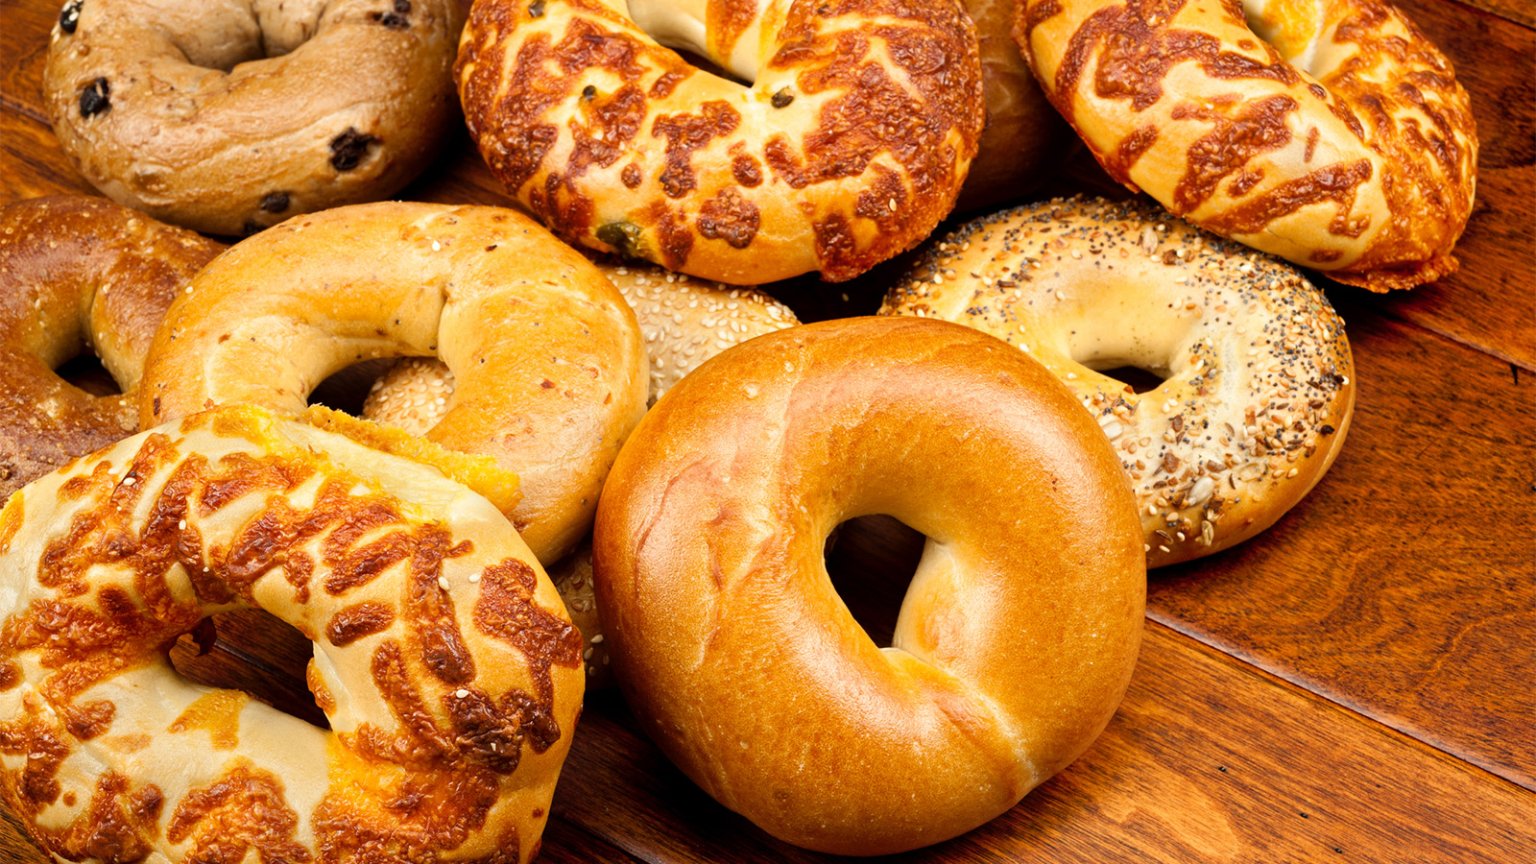 Free bagels for vaccinated customers at Panera Bread • The Long Island